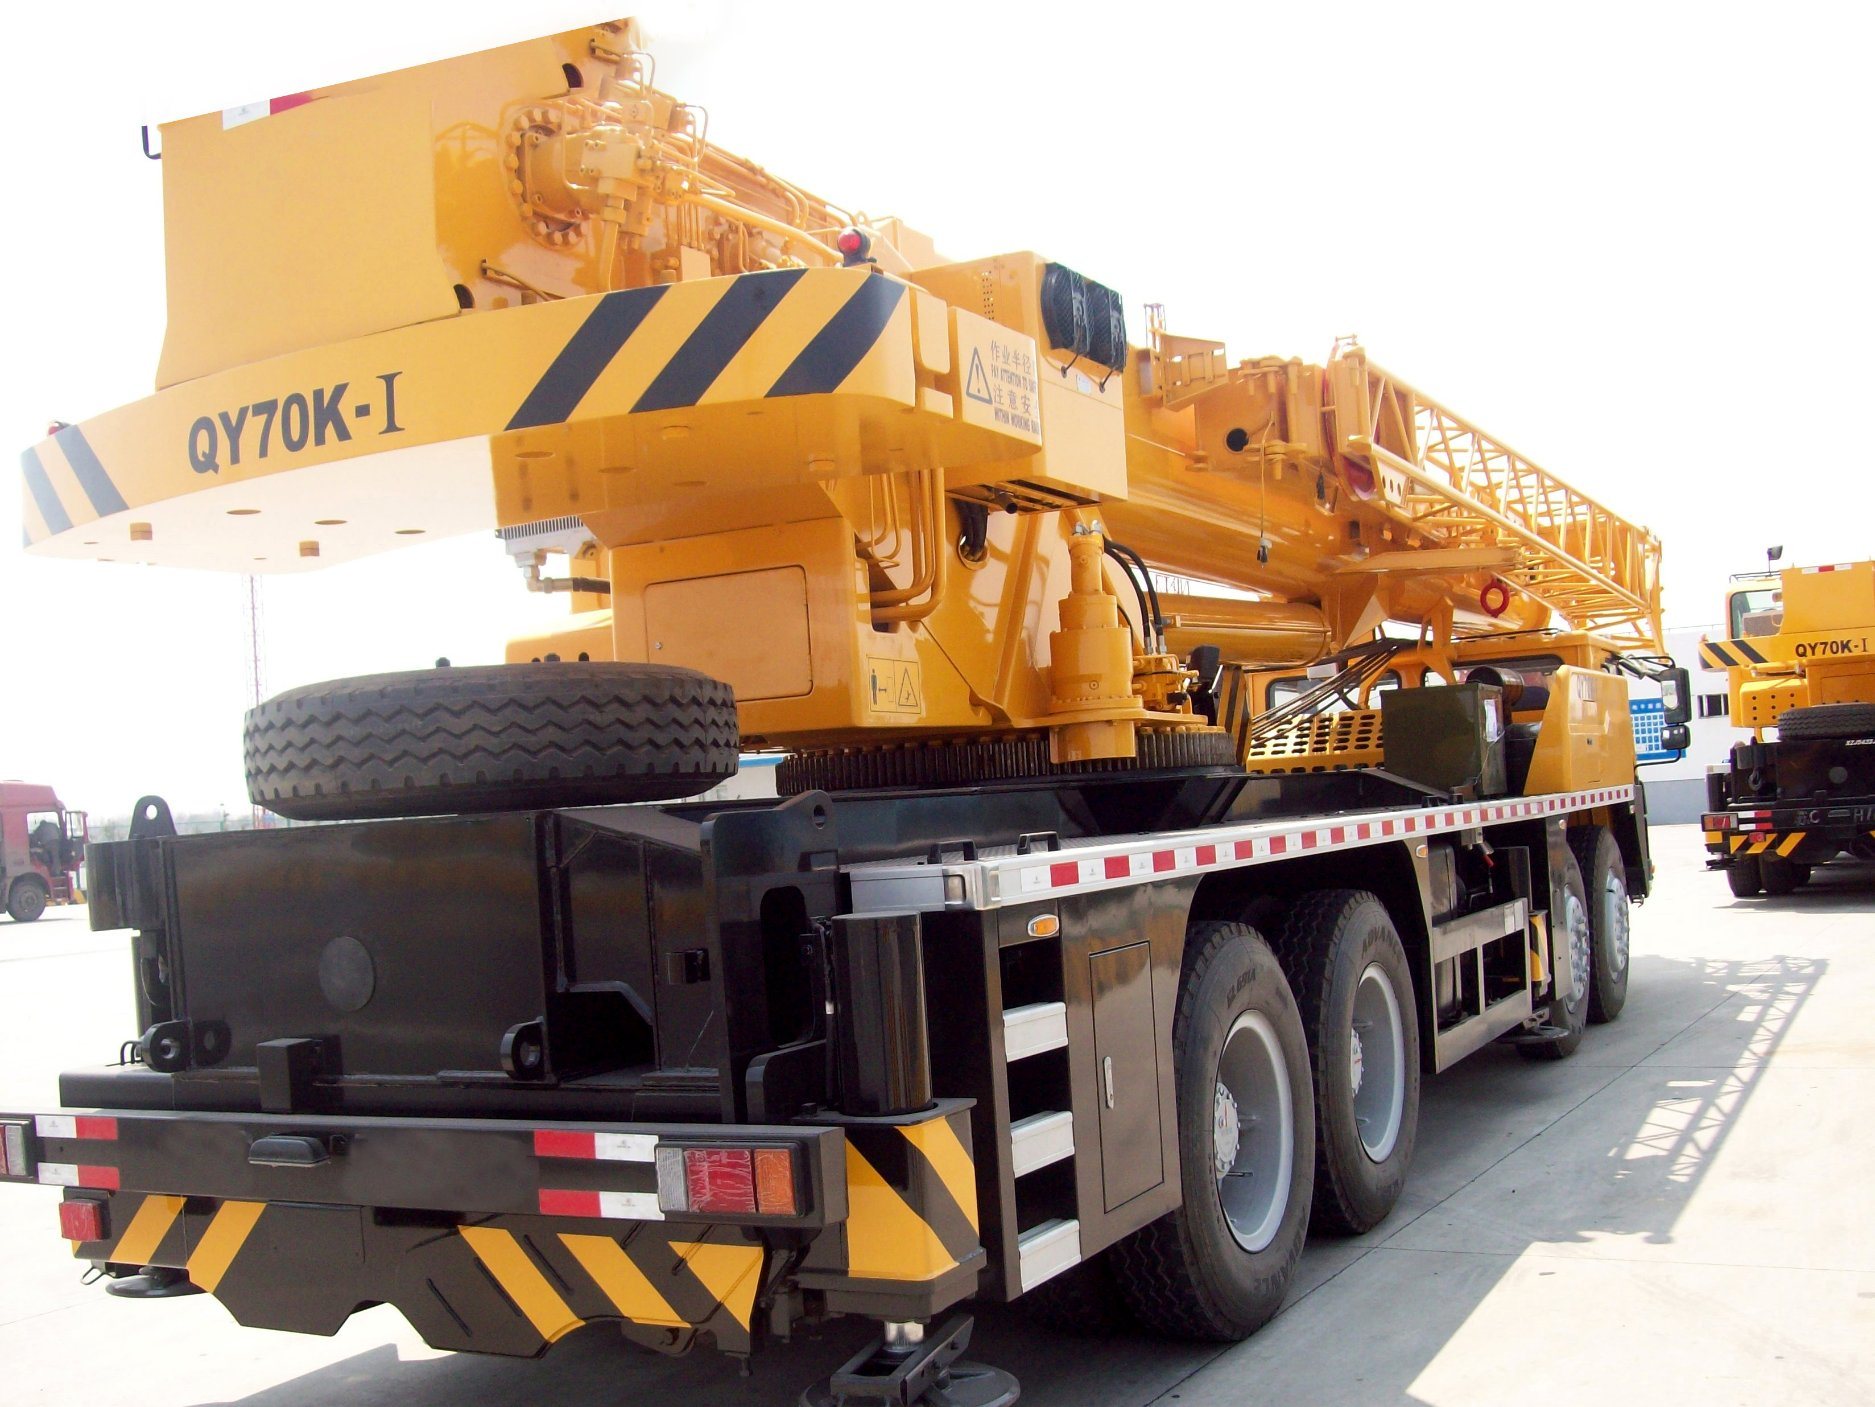 Mobile Lifting Equipment Machines Manufacturer in China 70 Ton Truck Crane Qy70kd